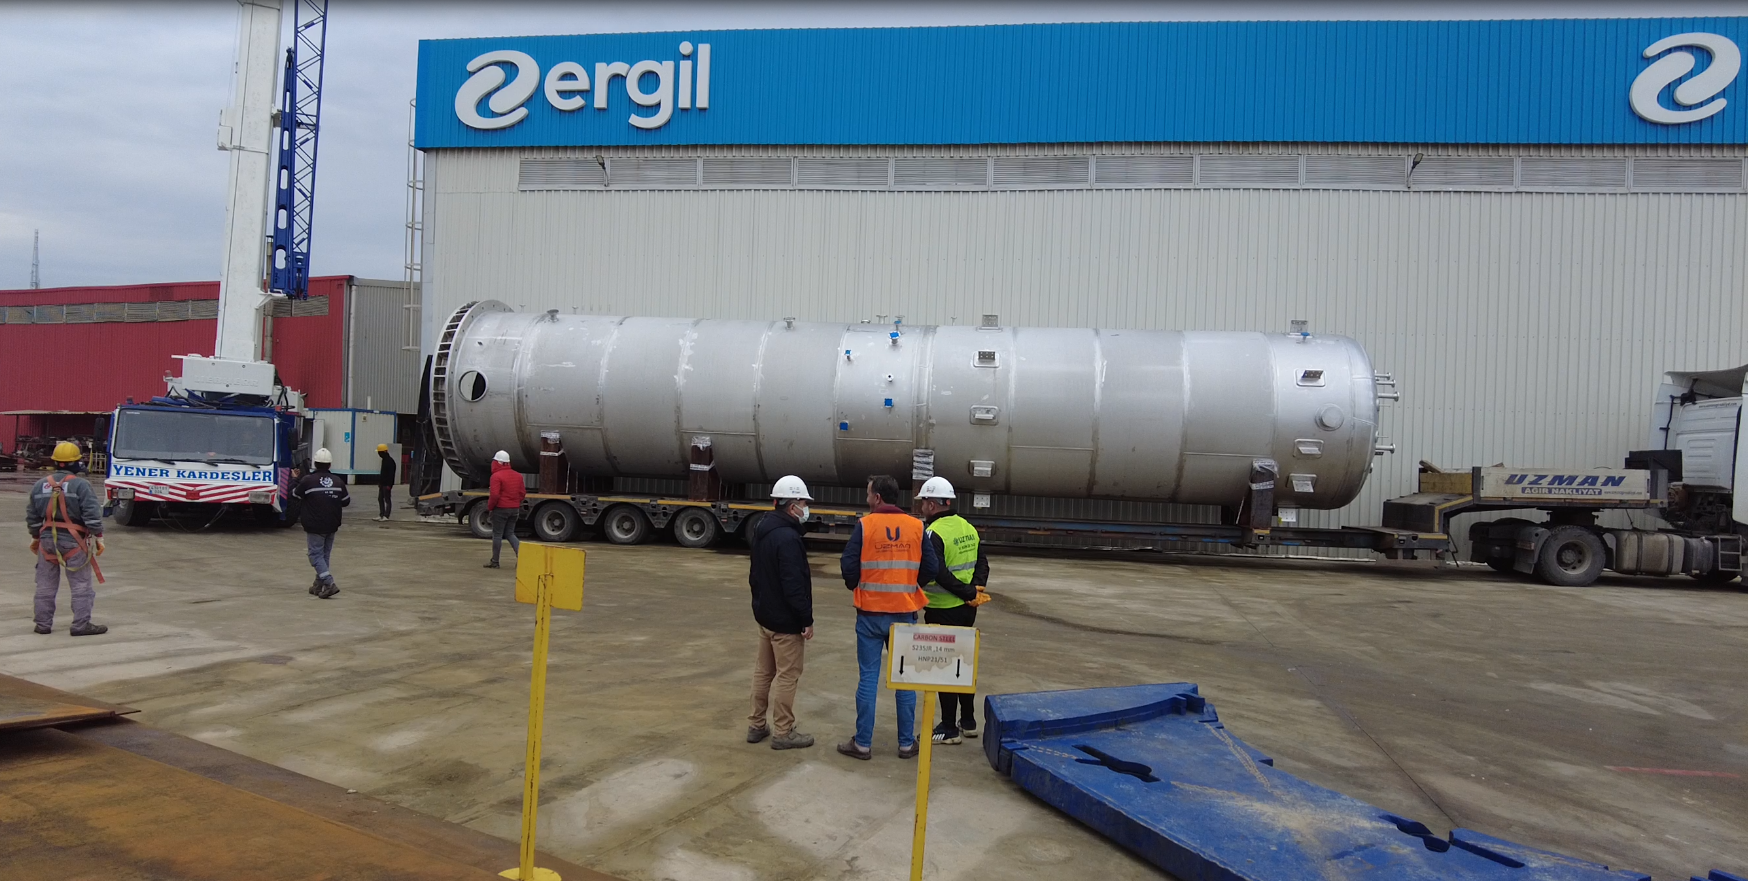 ERGIL is proud to announce the successful completion of our Distilled Nitrile & Crude Nitrile Vessel project 38